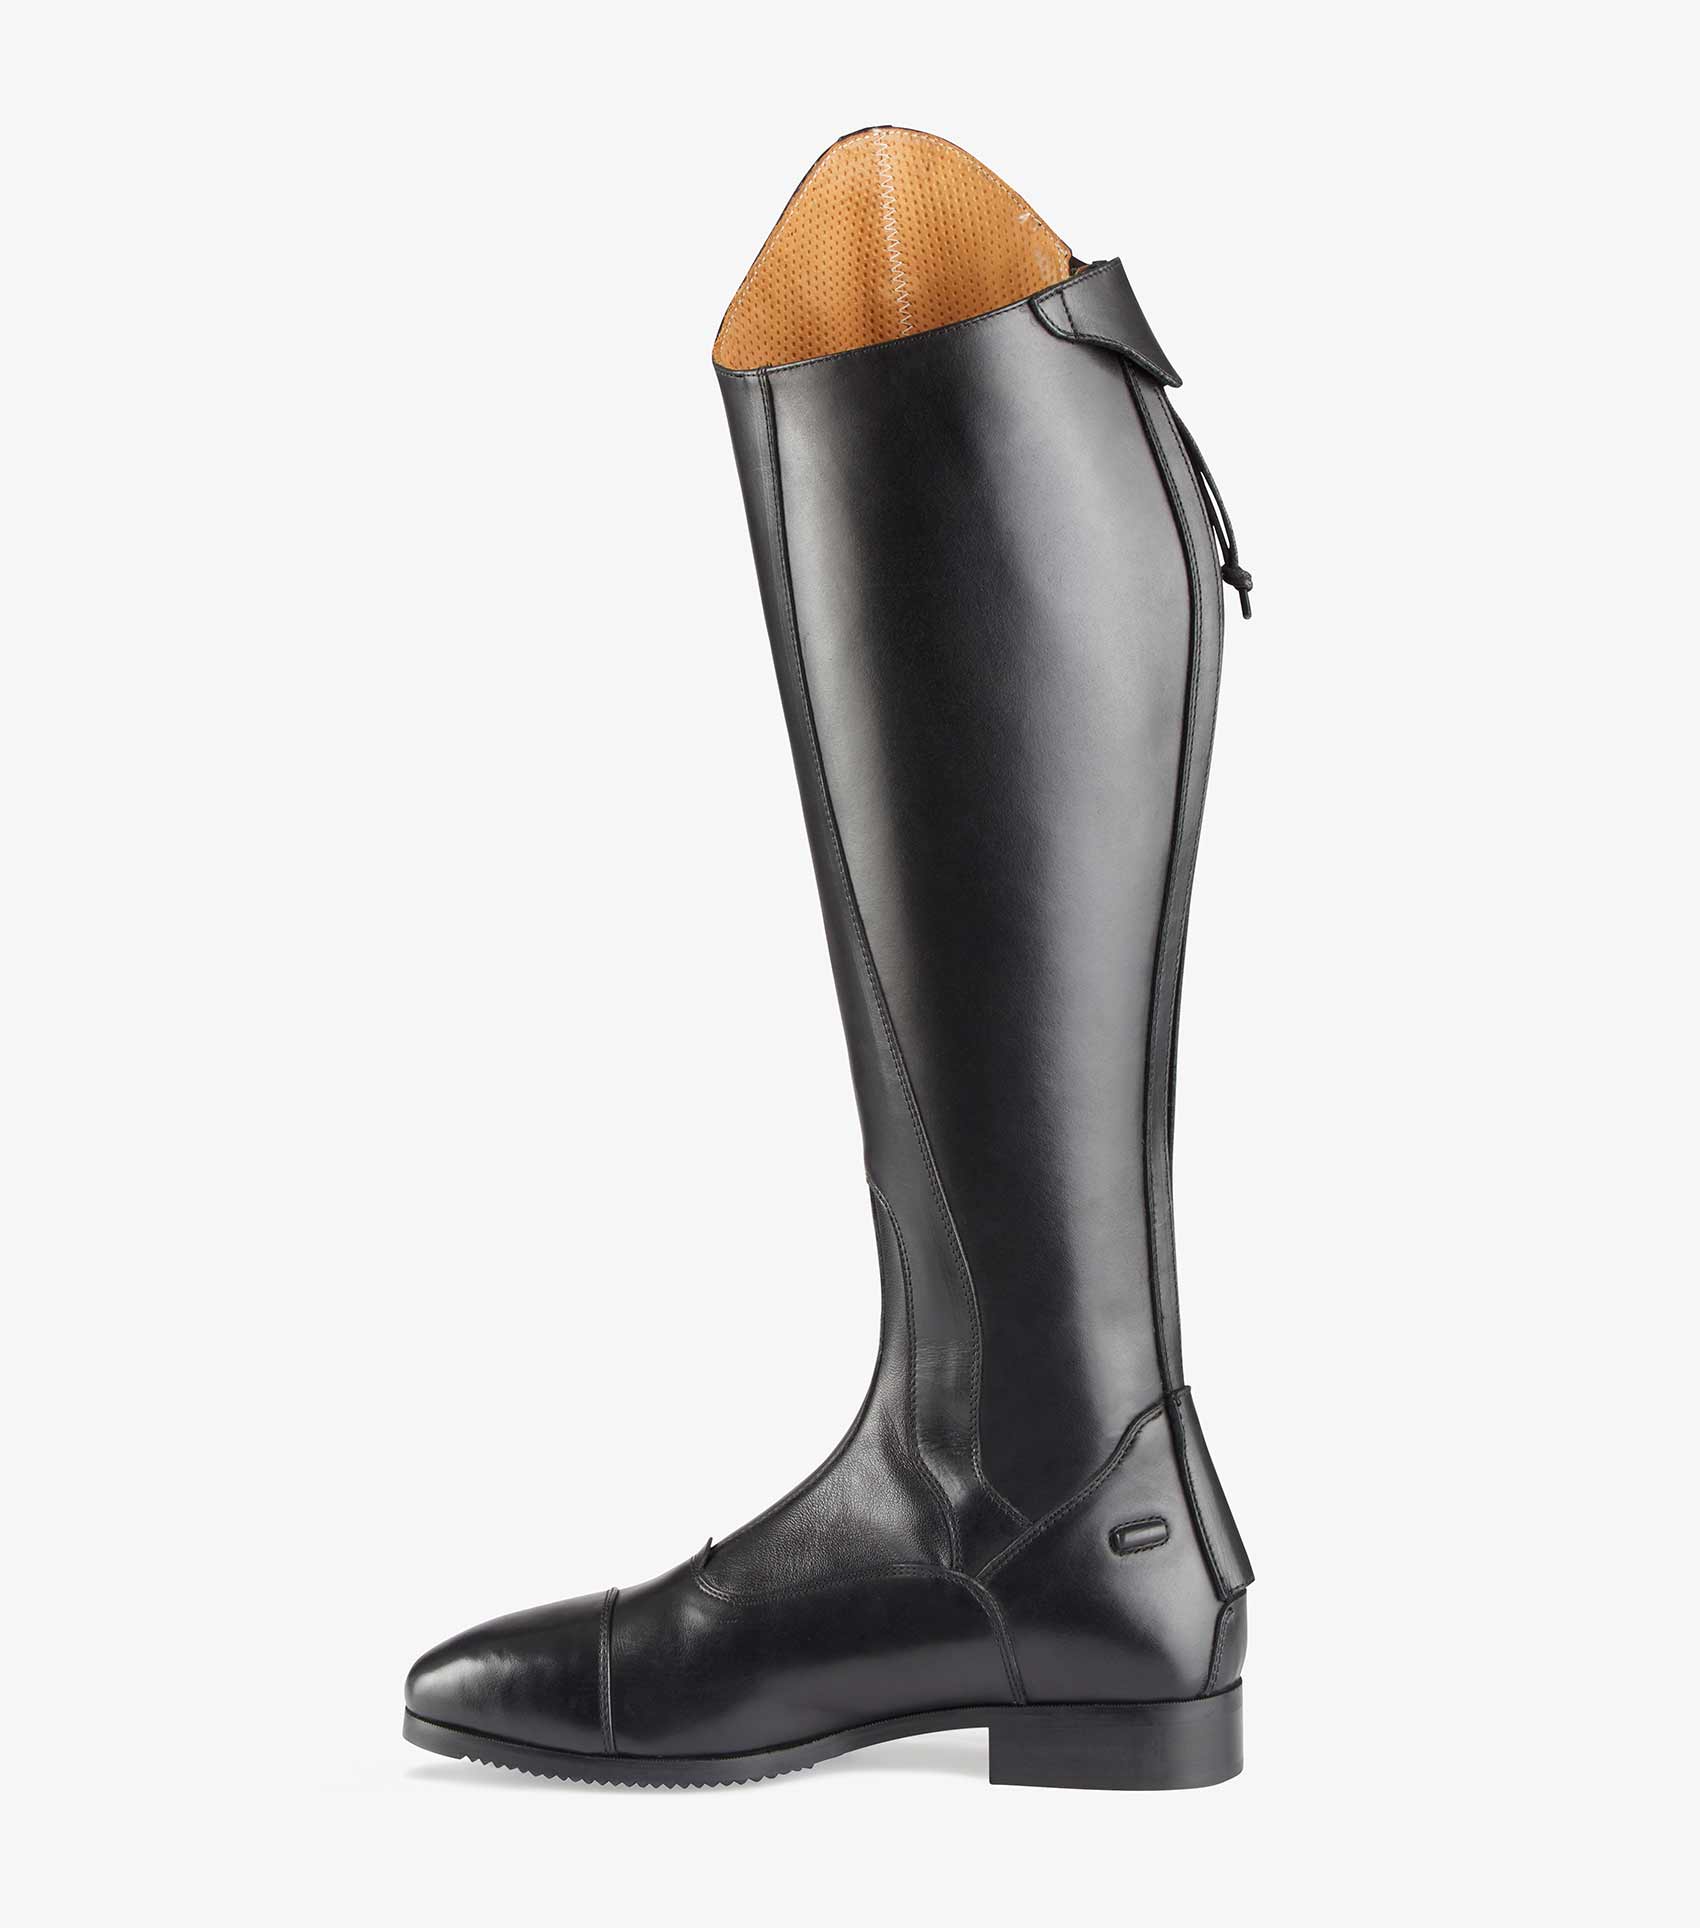 PE - Acquisto Mens Long Leather Dress Riding Boots Black – Essential ...